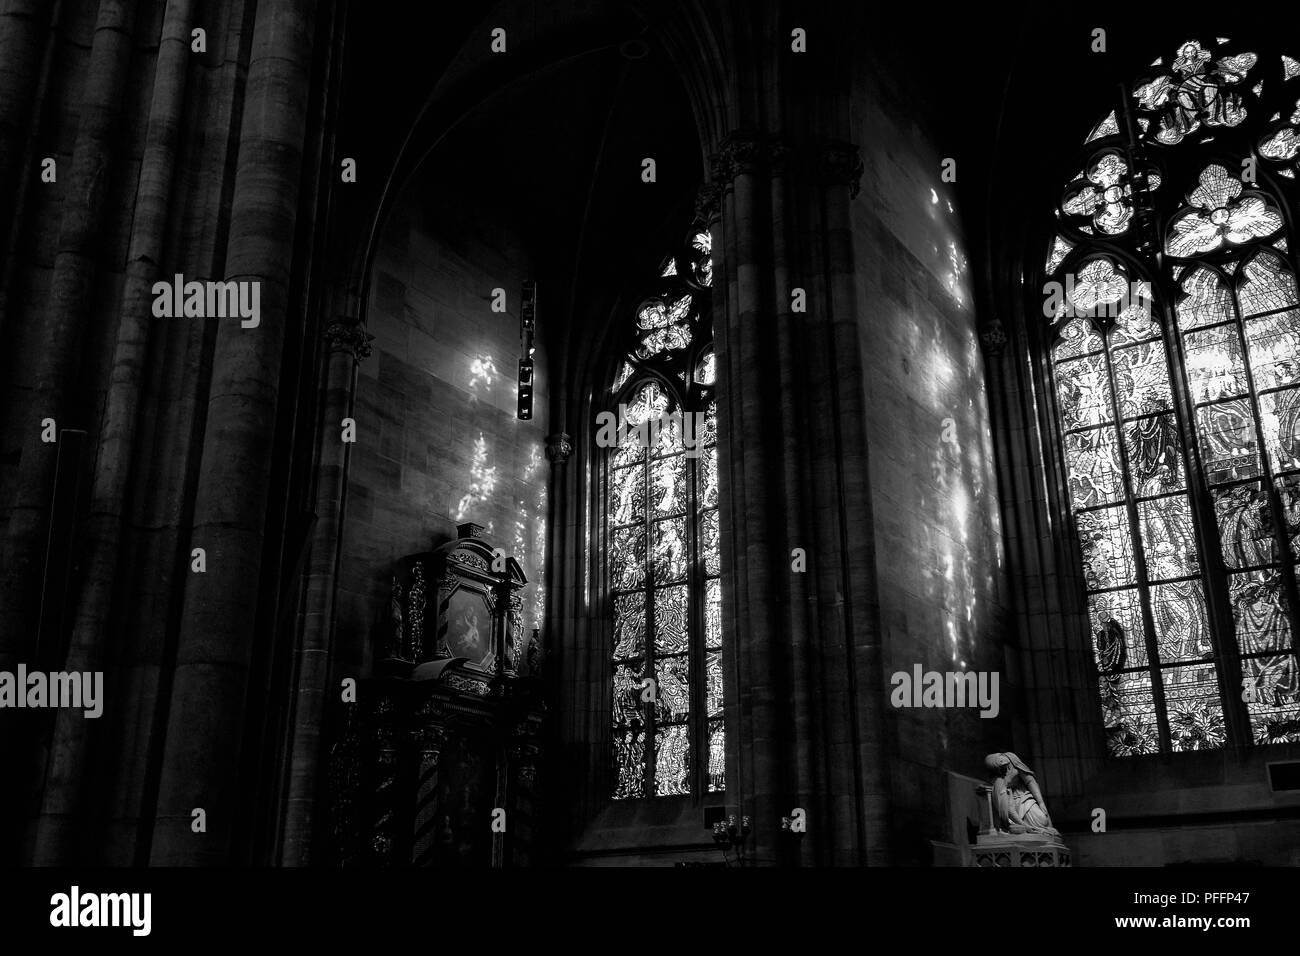 Interior of St. Vitus Cathedral in Prague, Czech Republic. Black and white. Stock Photo